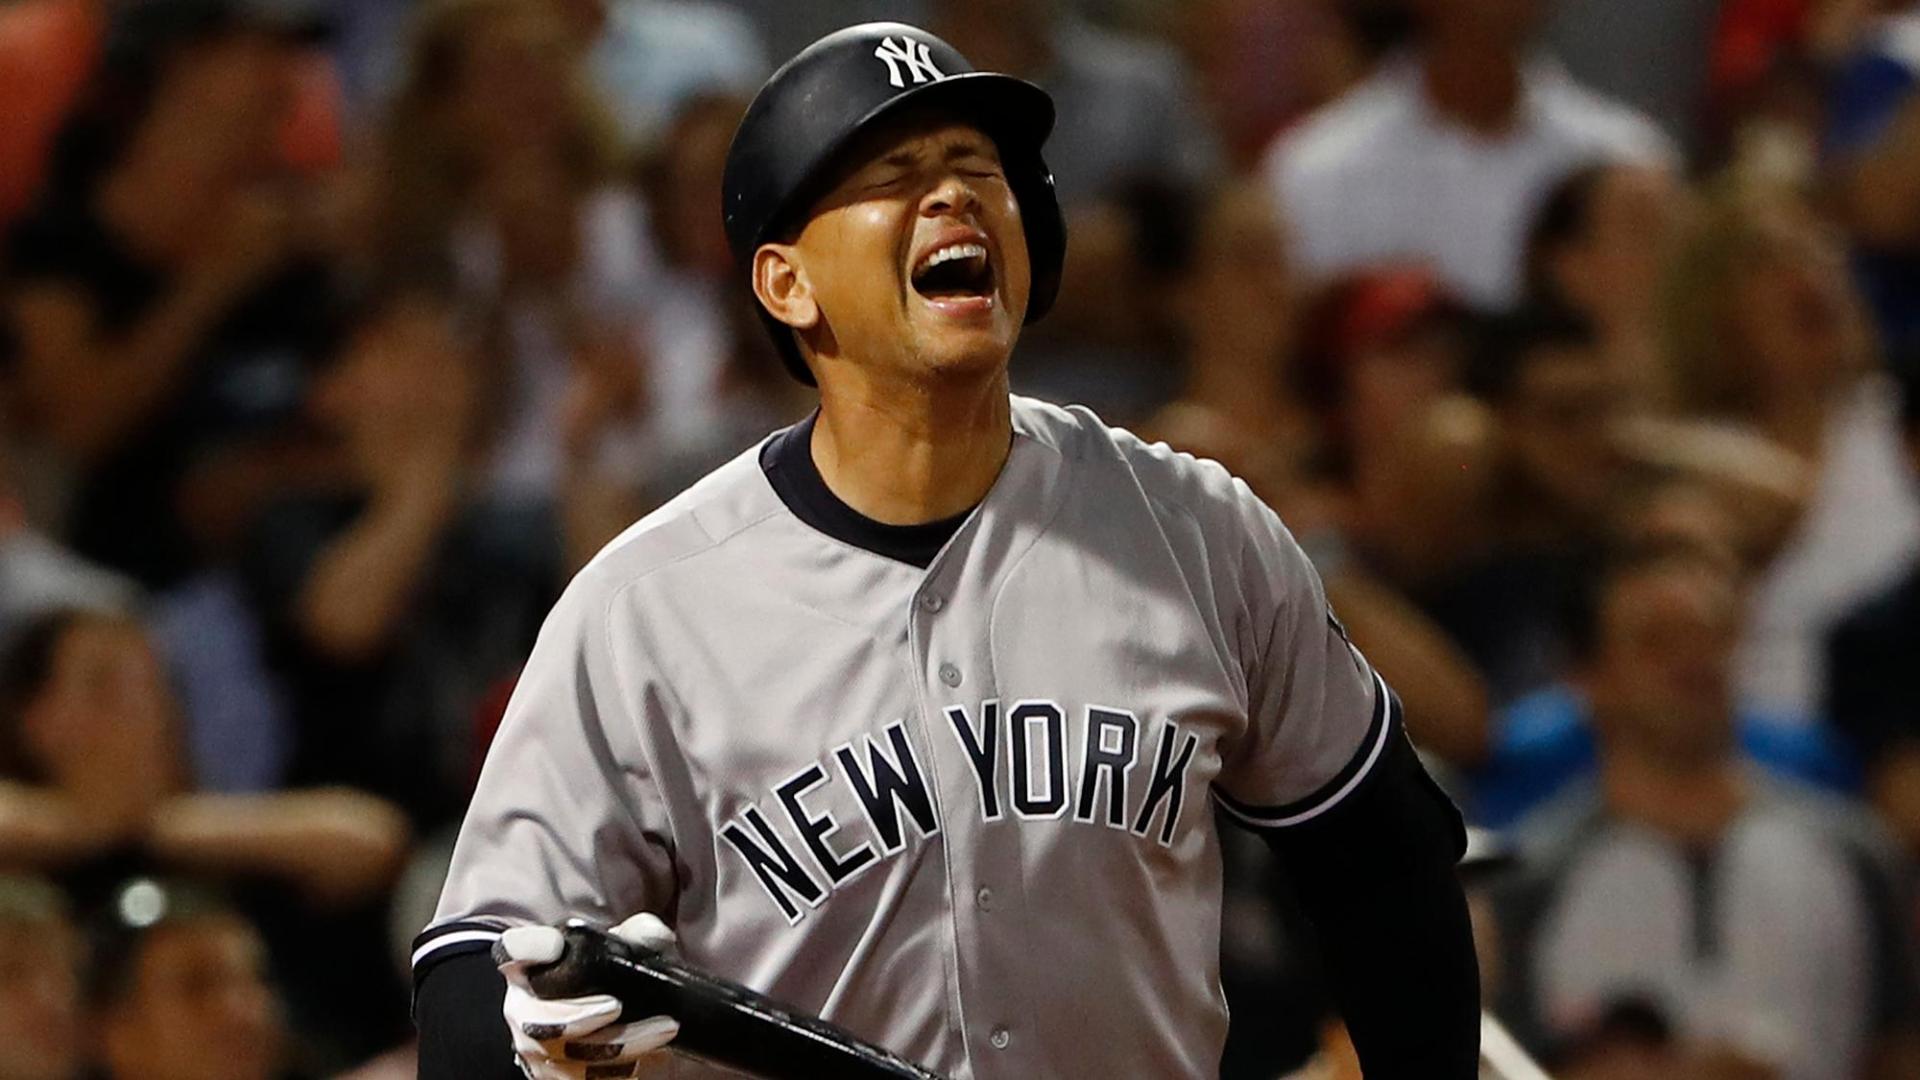 Amid boos, Alex Rodriguez flies out as pinch hitter vs. Red Sox